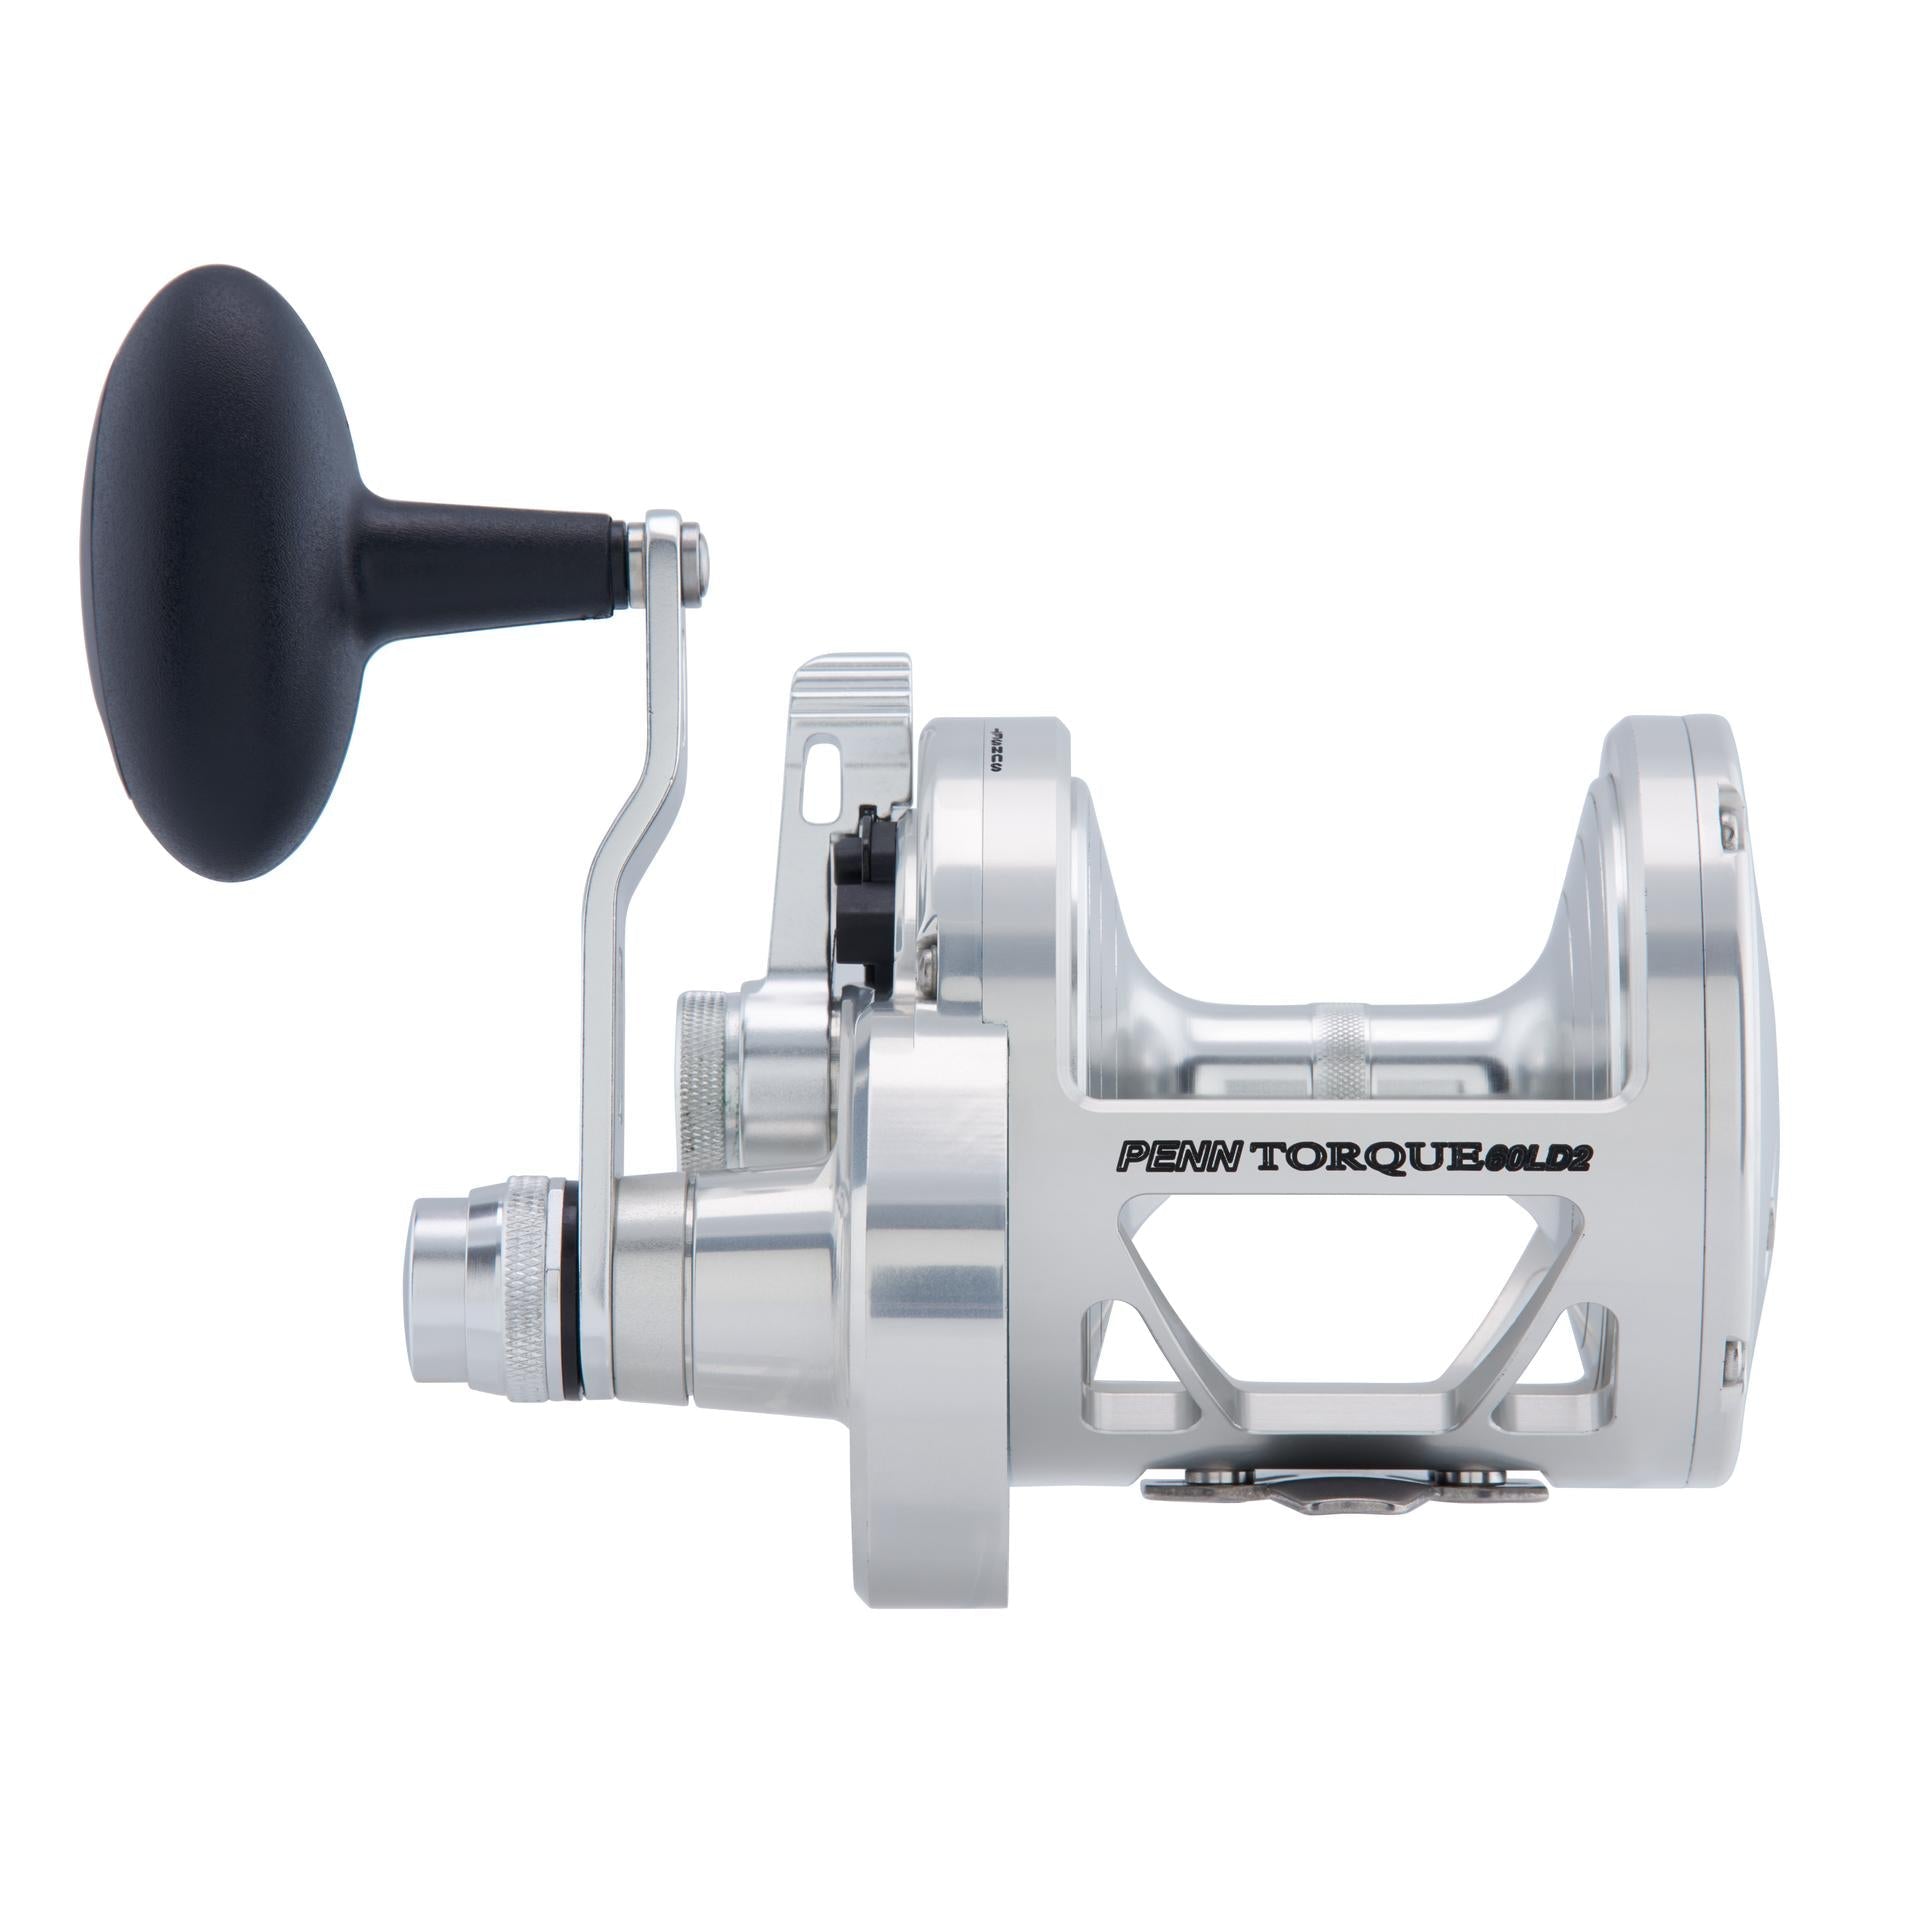 PENN TORQUE LEVER DRAG 2 SPEED CONVENTIONAL REEL – Big Dog Tackle